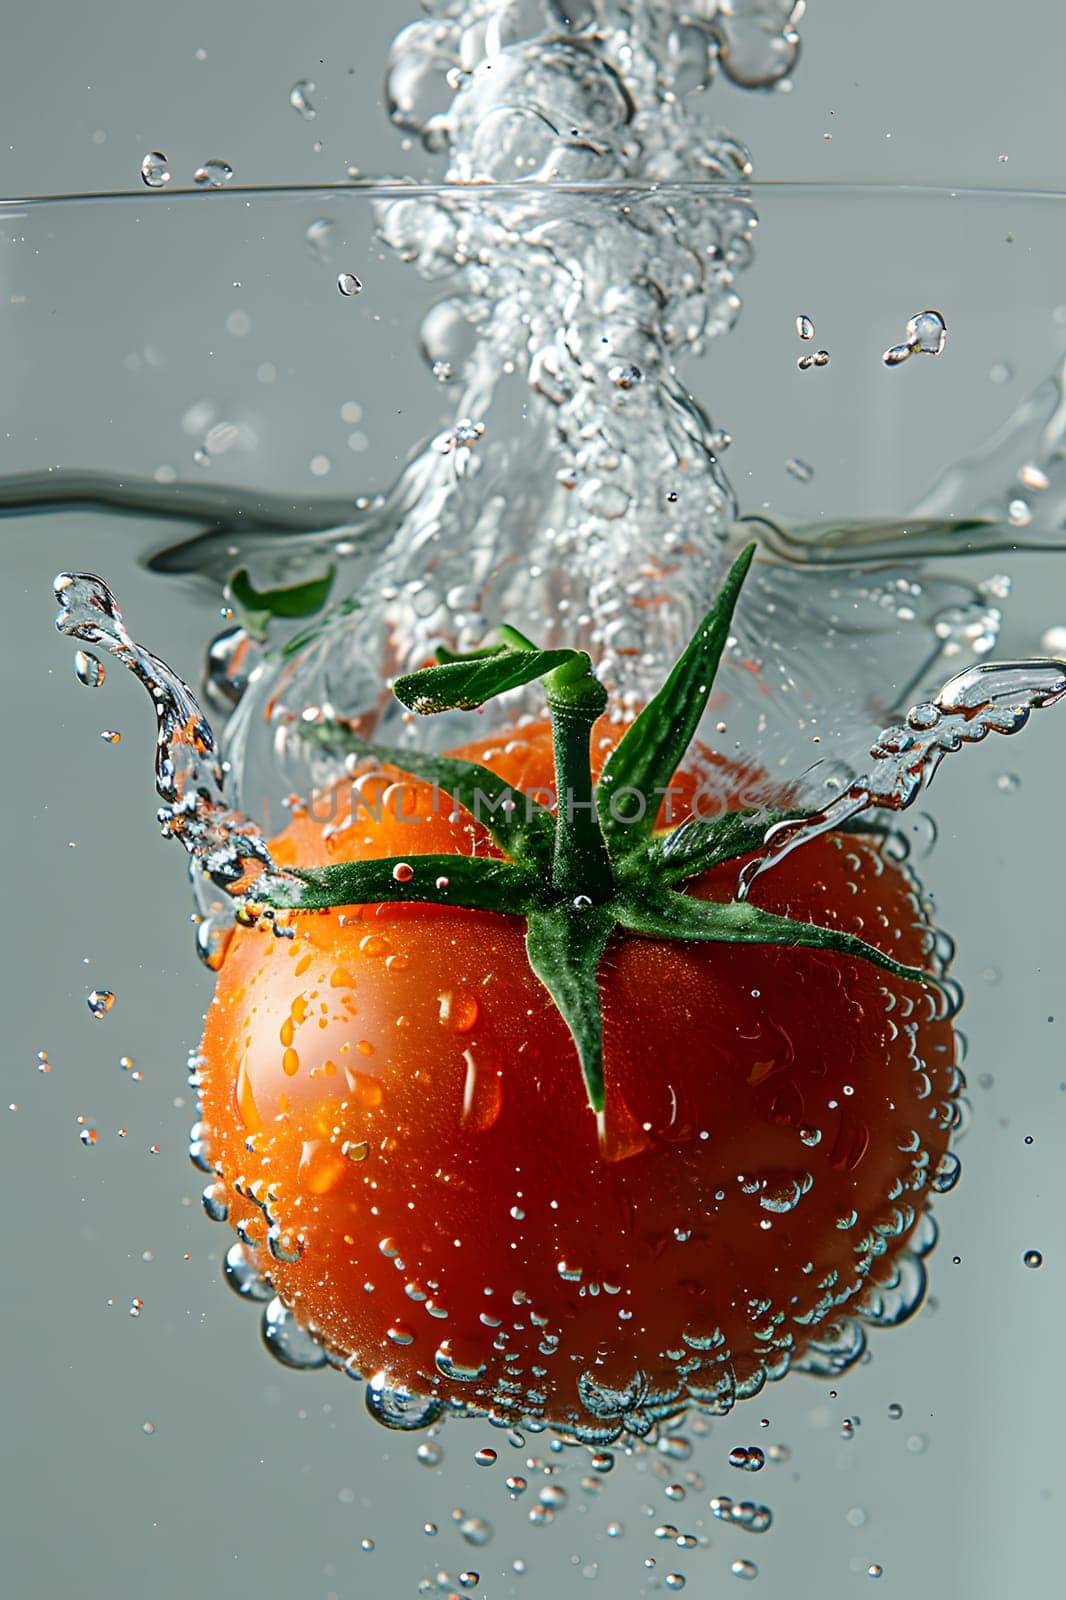 A ripe tomato is plopping into a refreshing glass of water, creating a splash. The vibrant red fruit resembles a Christmas ornament as it mixes with the liquid